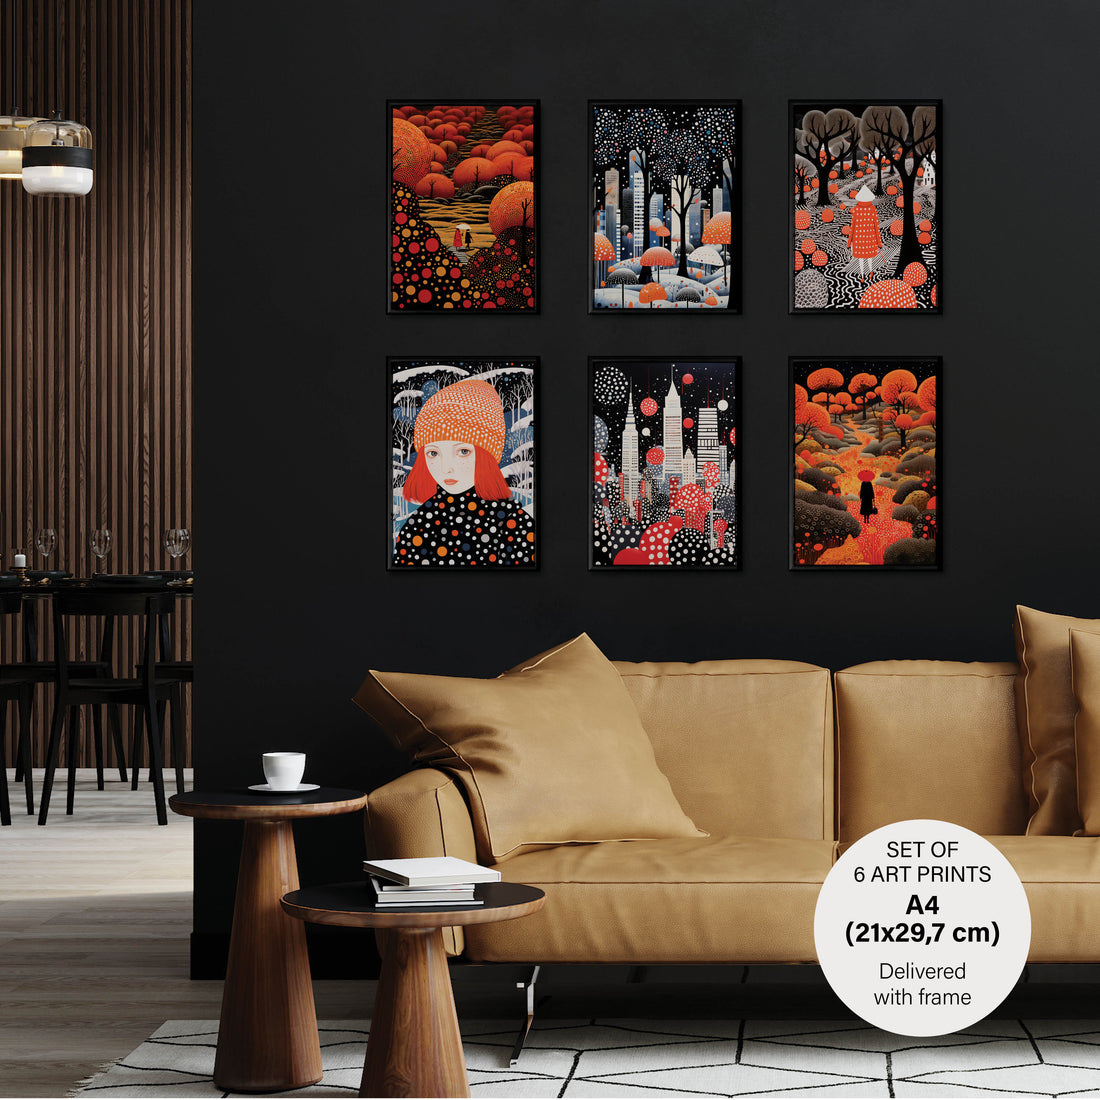 Stylish Polka Dot Set - 6 Posters with Black Oak Frame - Gallery Wall